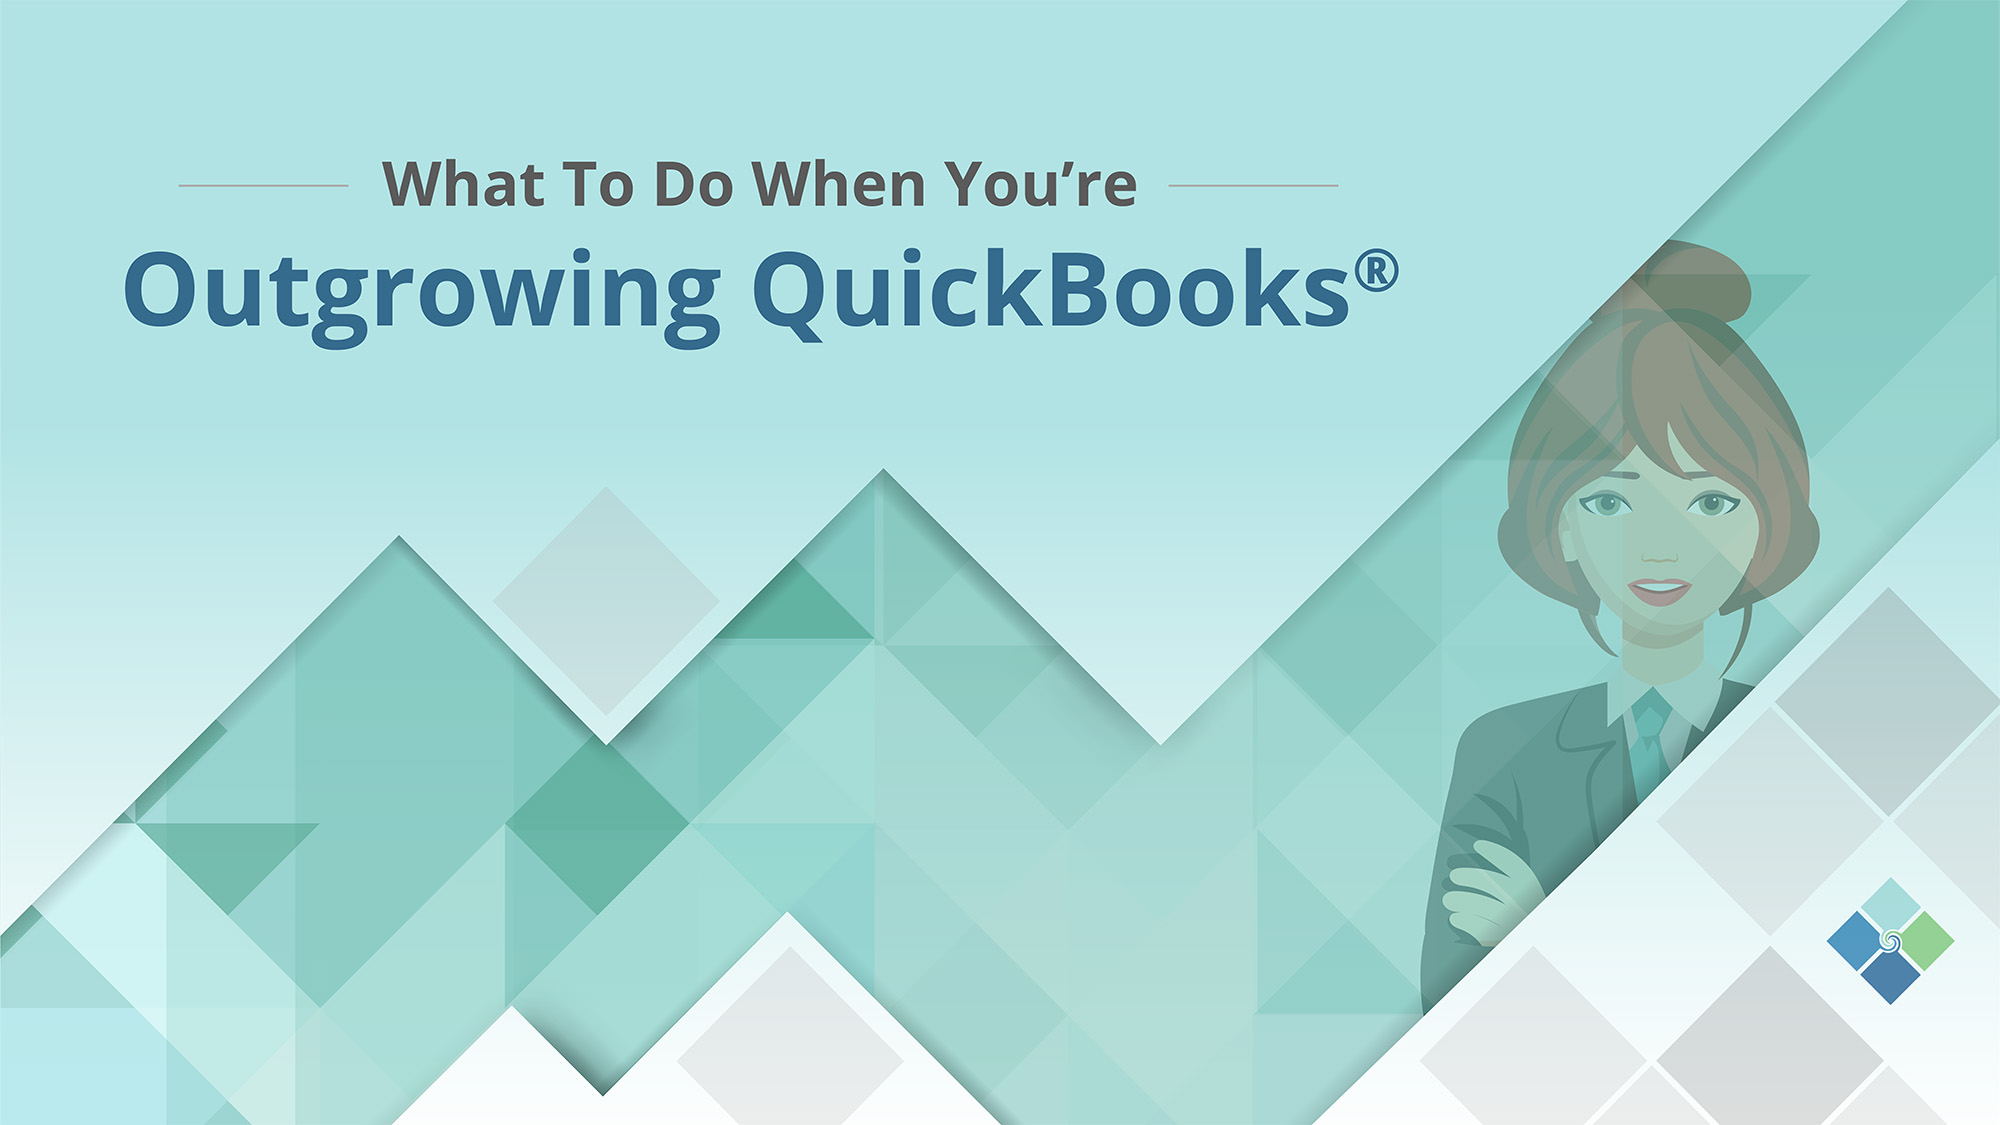 What To Do When You're Outgrowing QuickBooks white paper with upward trajectory graphic and businesswoman